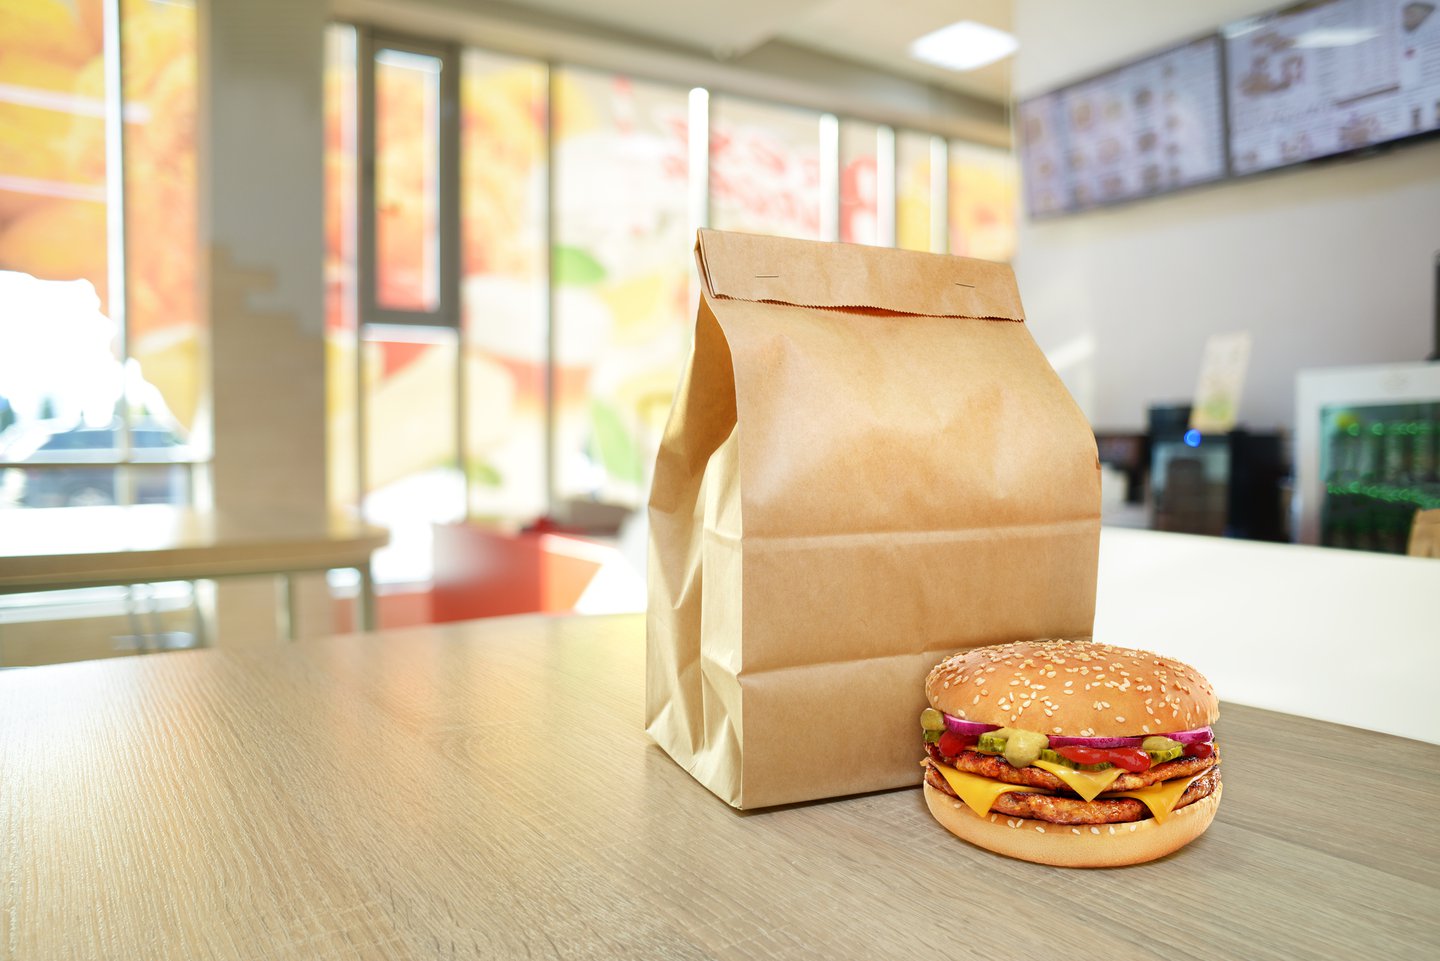 What Will Burger Kings New Touchless Restaurant Design Mean For Commercial Businesses